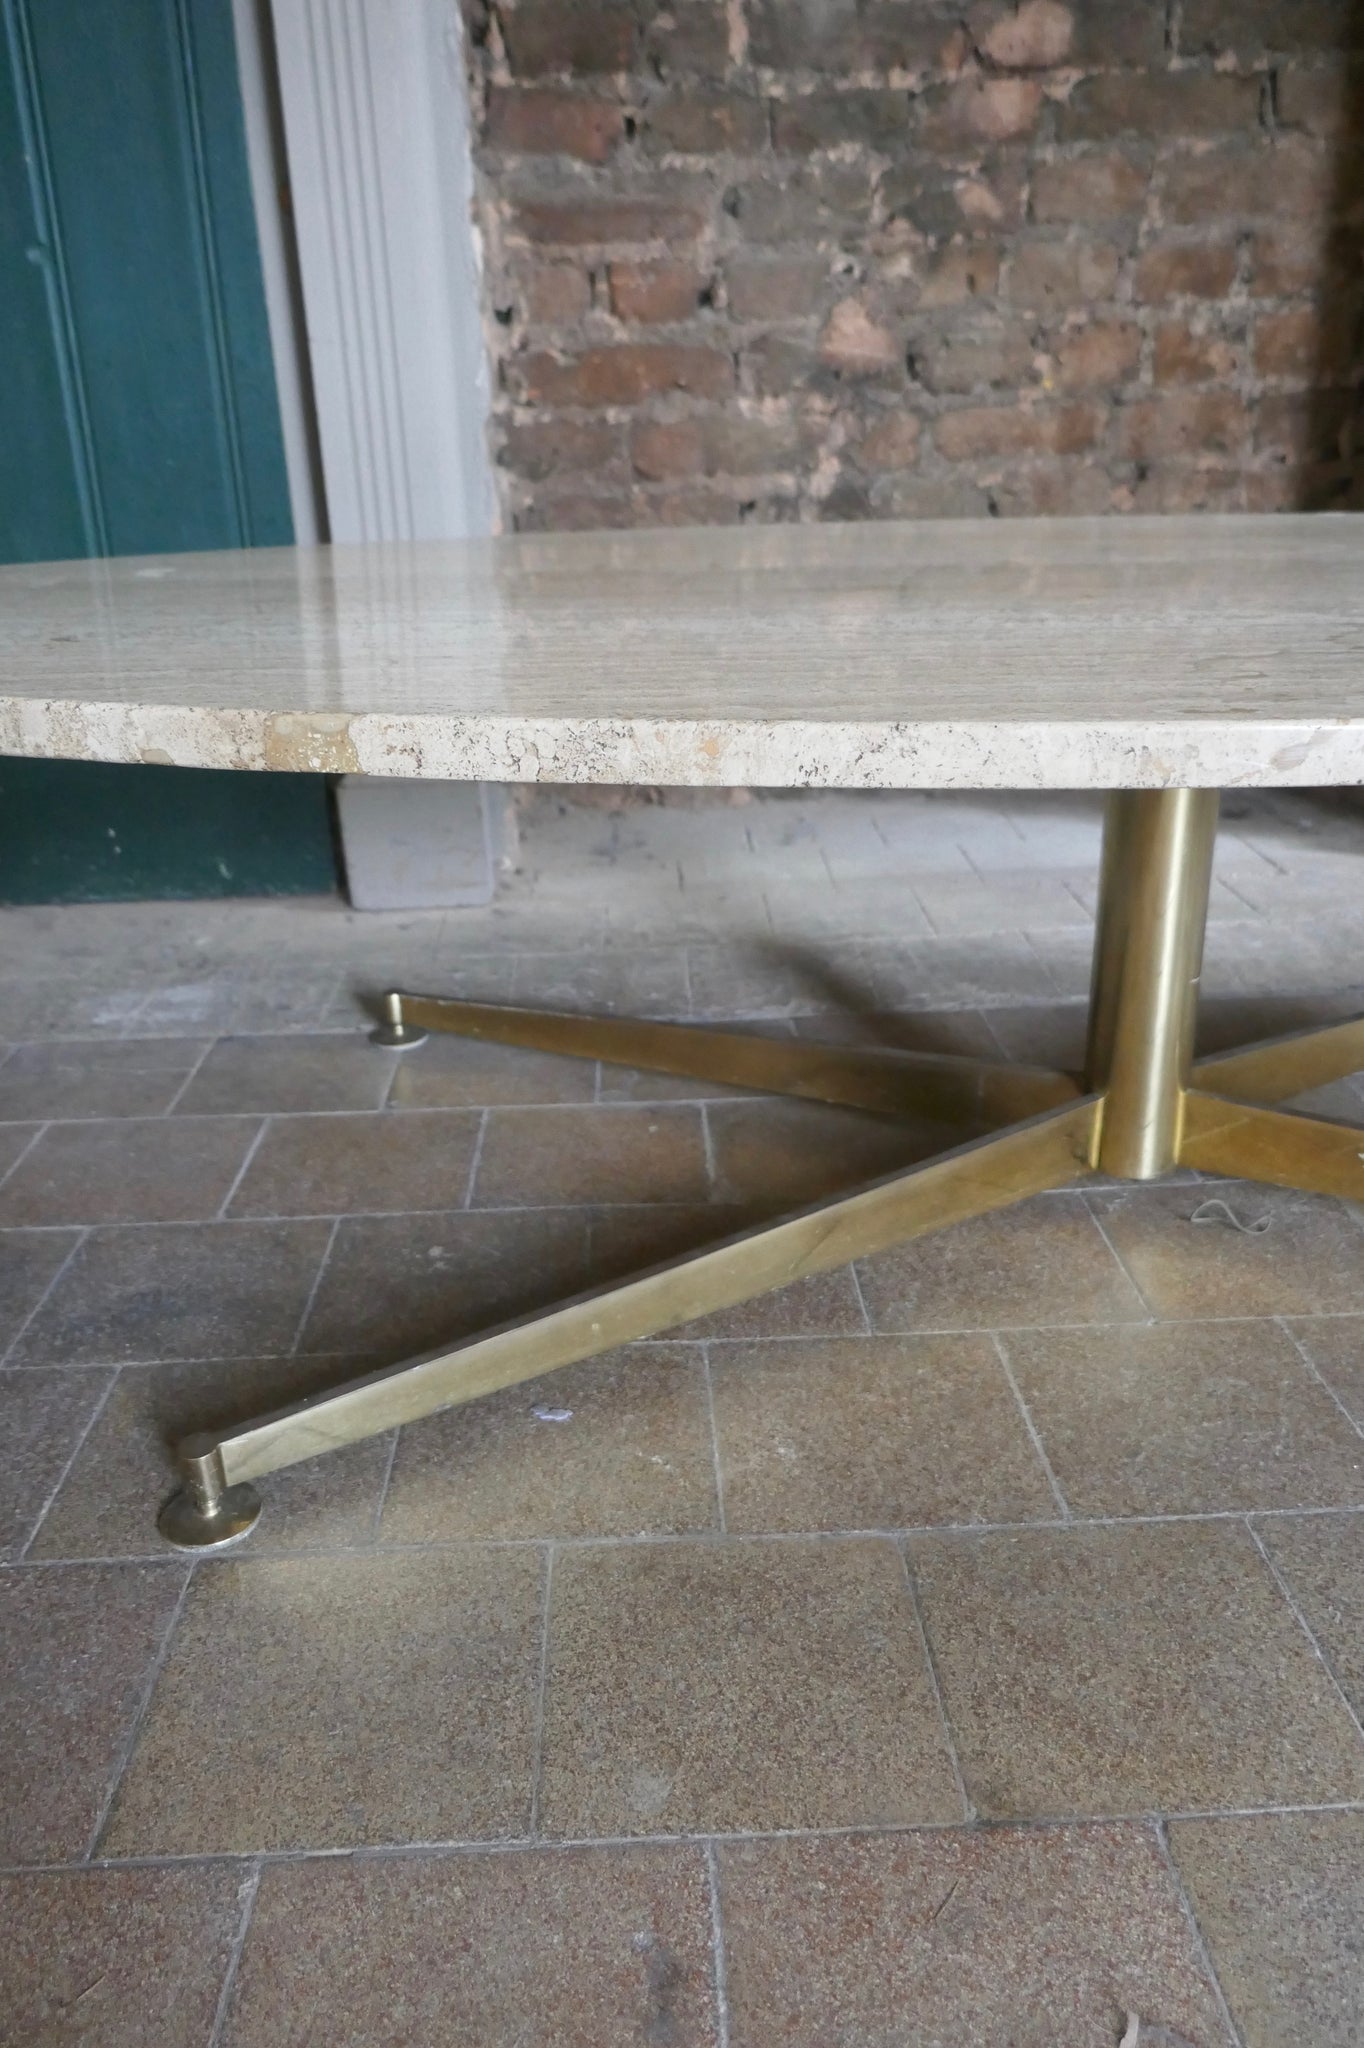 Large Italian 1970's coffee table with elliptical travertine marble top